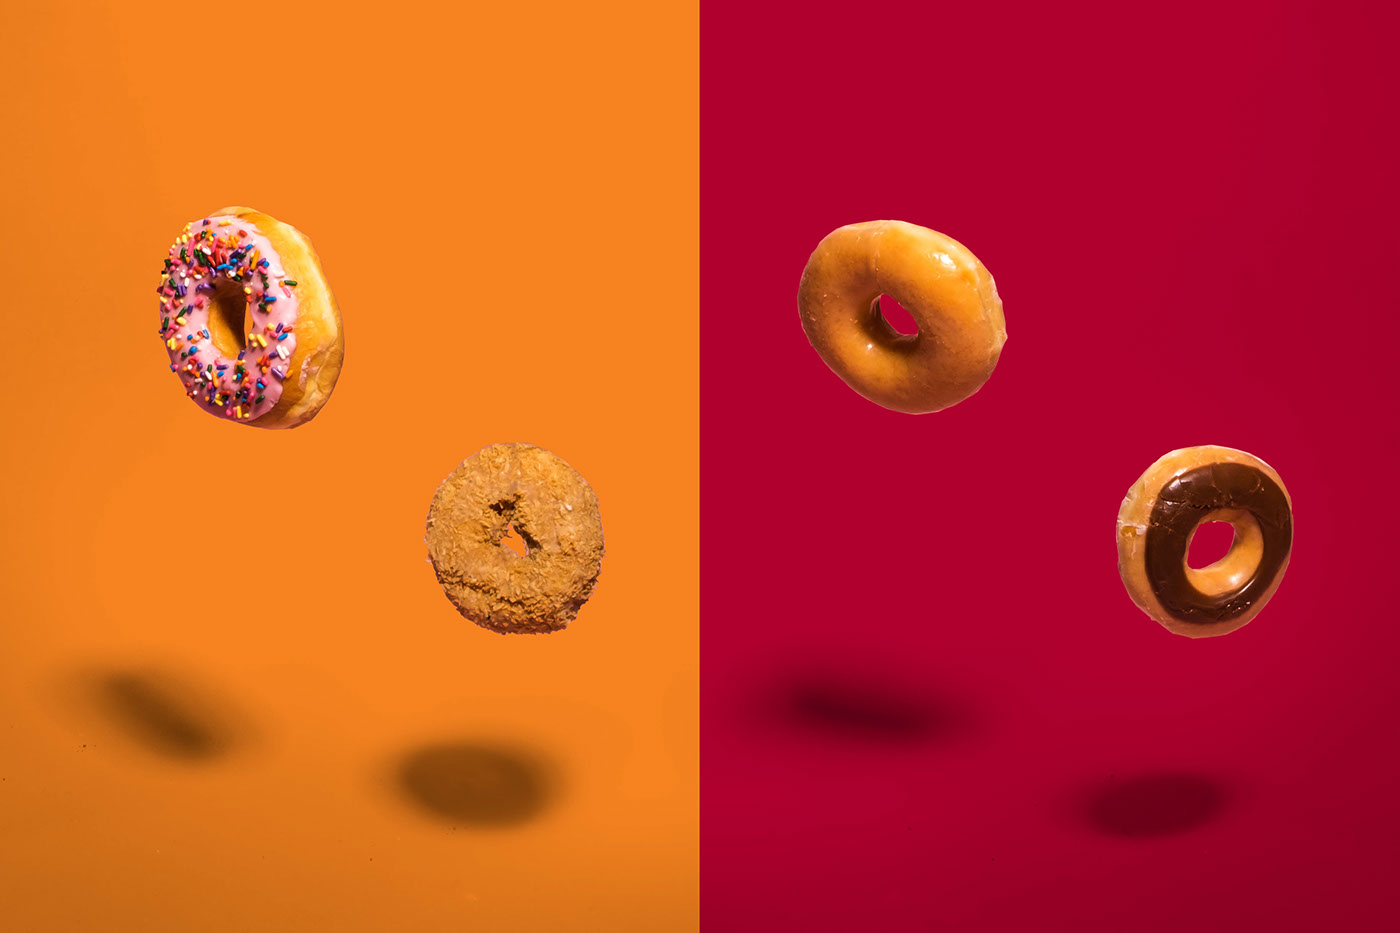 art direction  set design  Photography  Food  Donuts editorial